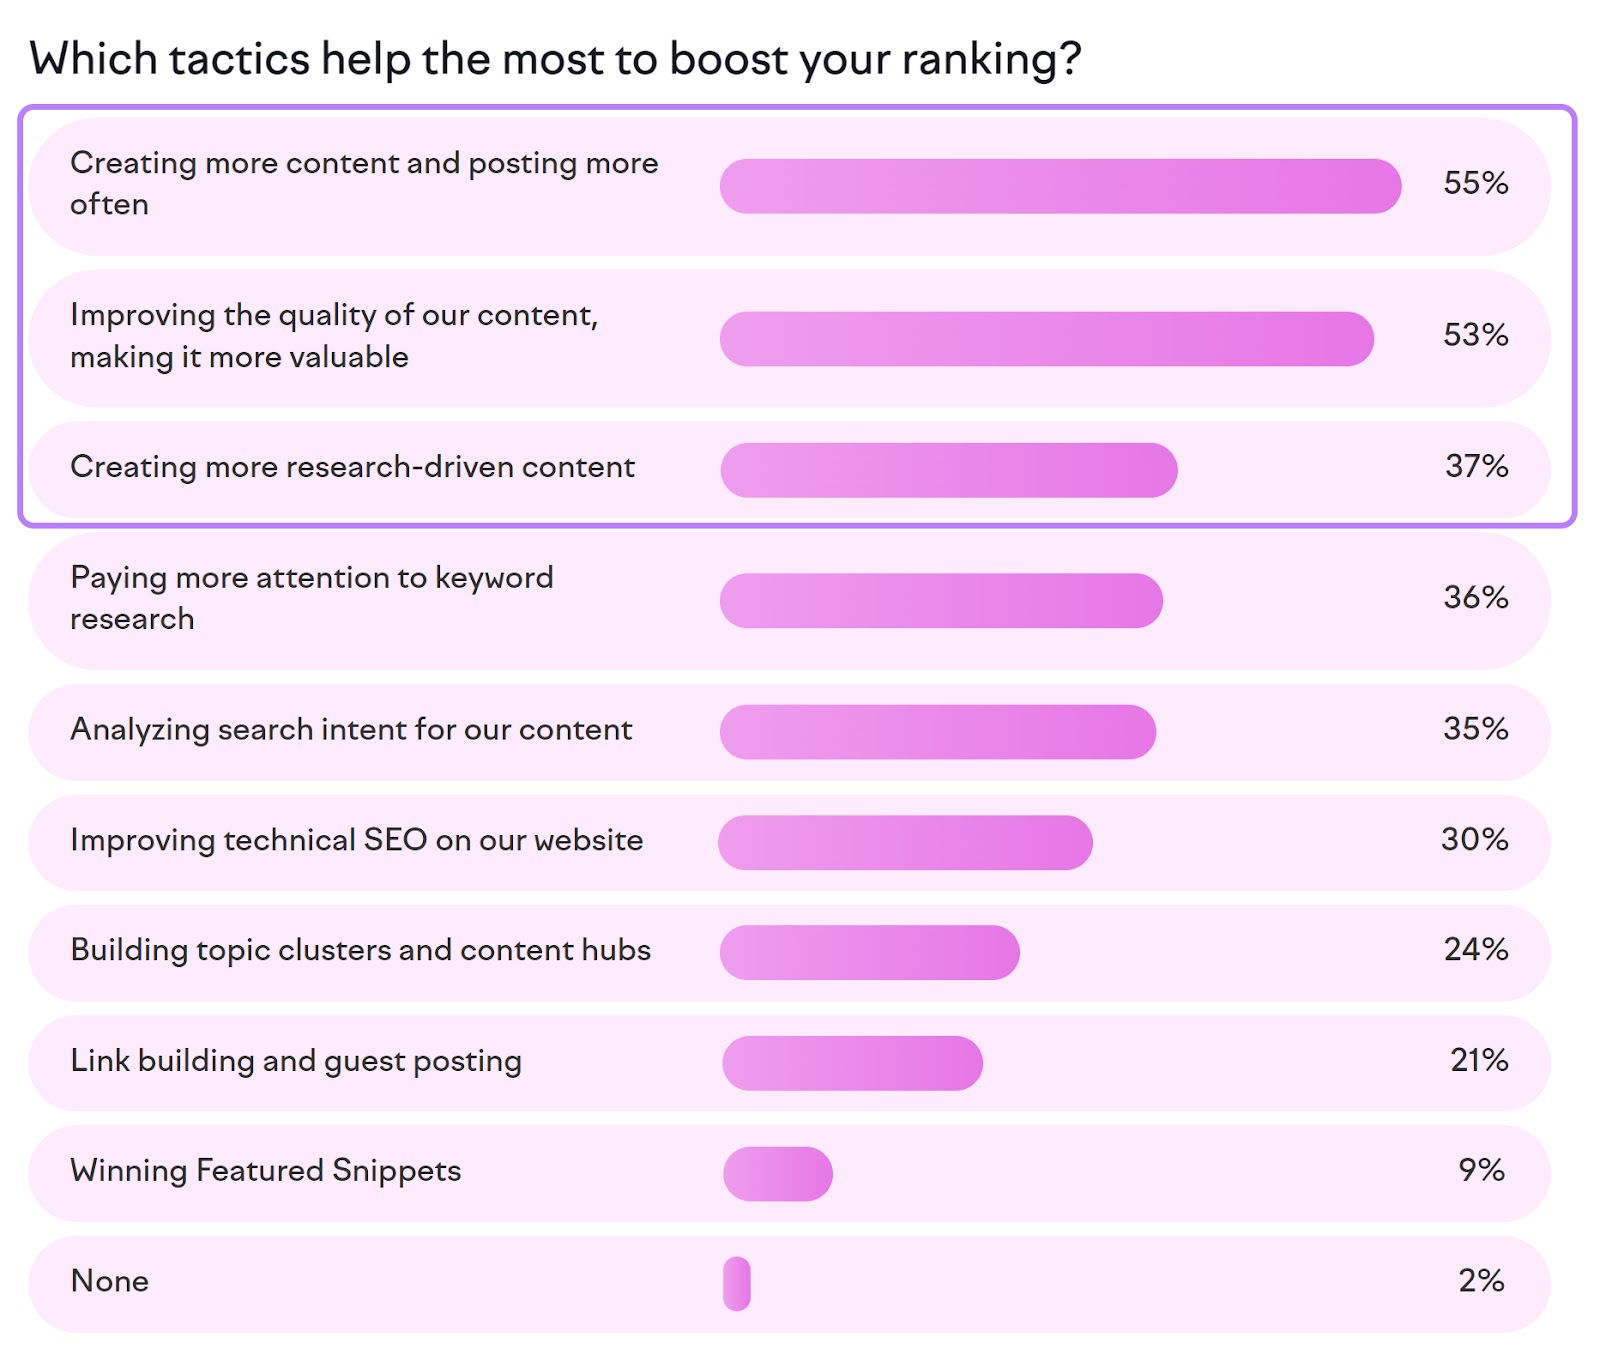 Answers to "Which tactics help the most to boost your ranking?" from State of Content Marketing Report